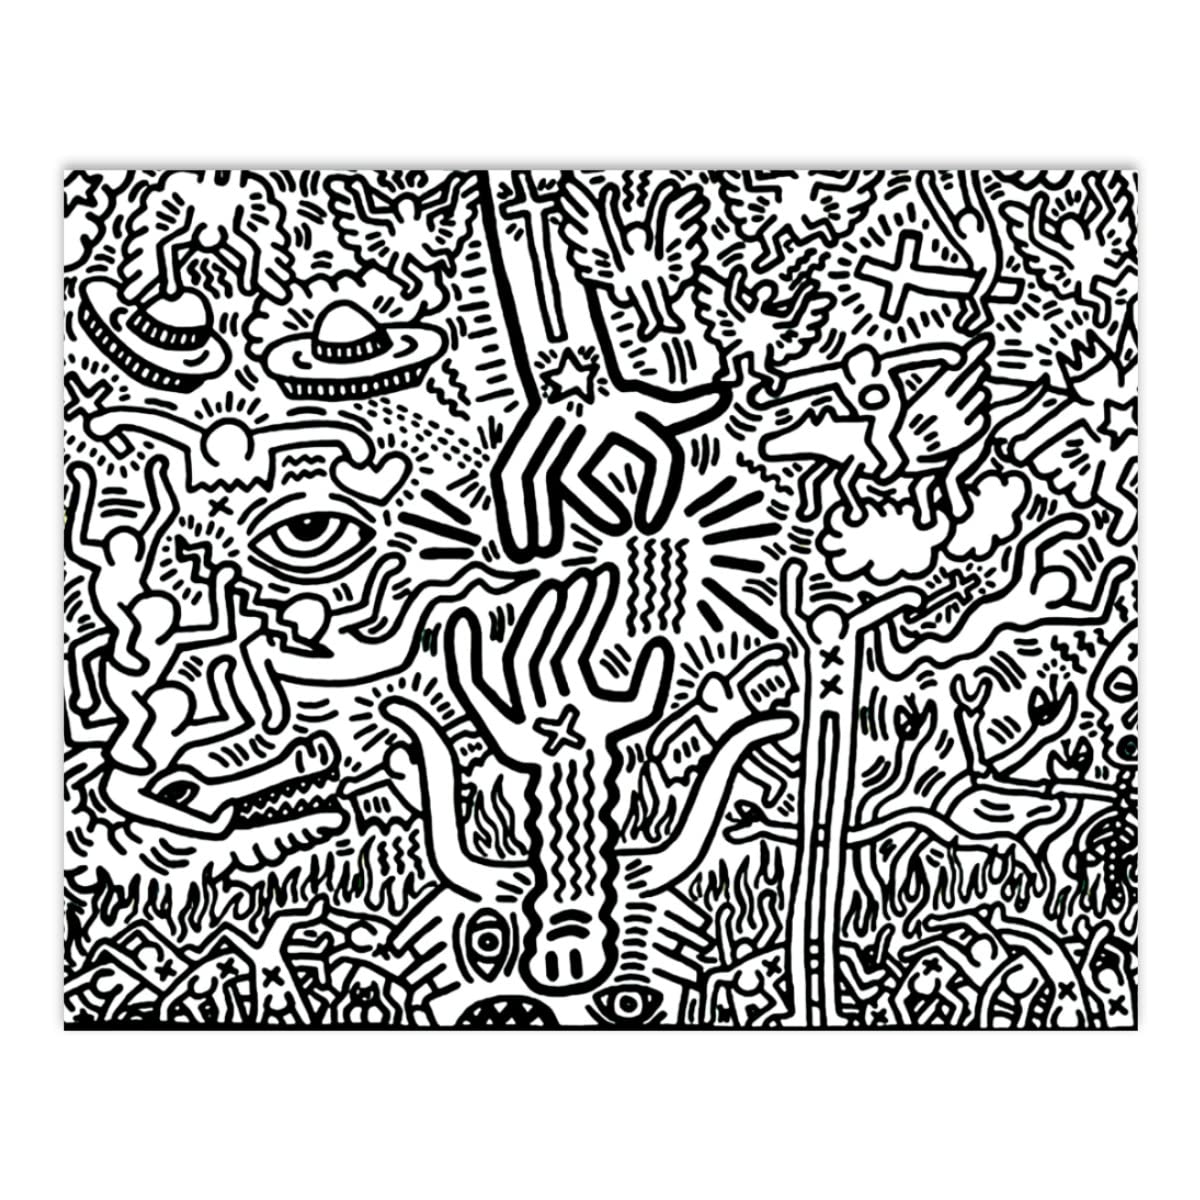 Diy number oil painting keith haring number oil painting number kit loring book hand painted digital oil painting diy painting home canvas oil painting gifts for adults kids painting with number